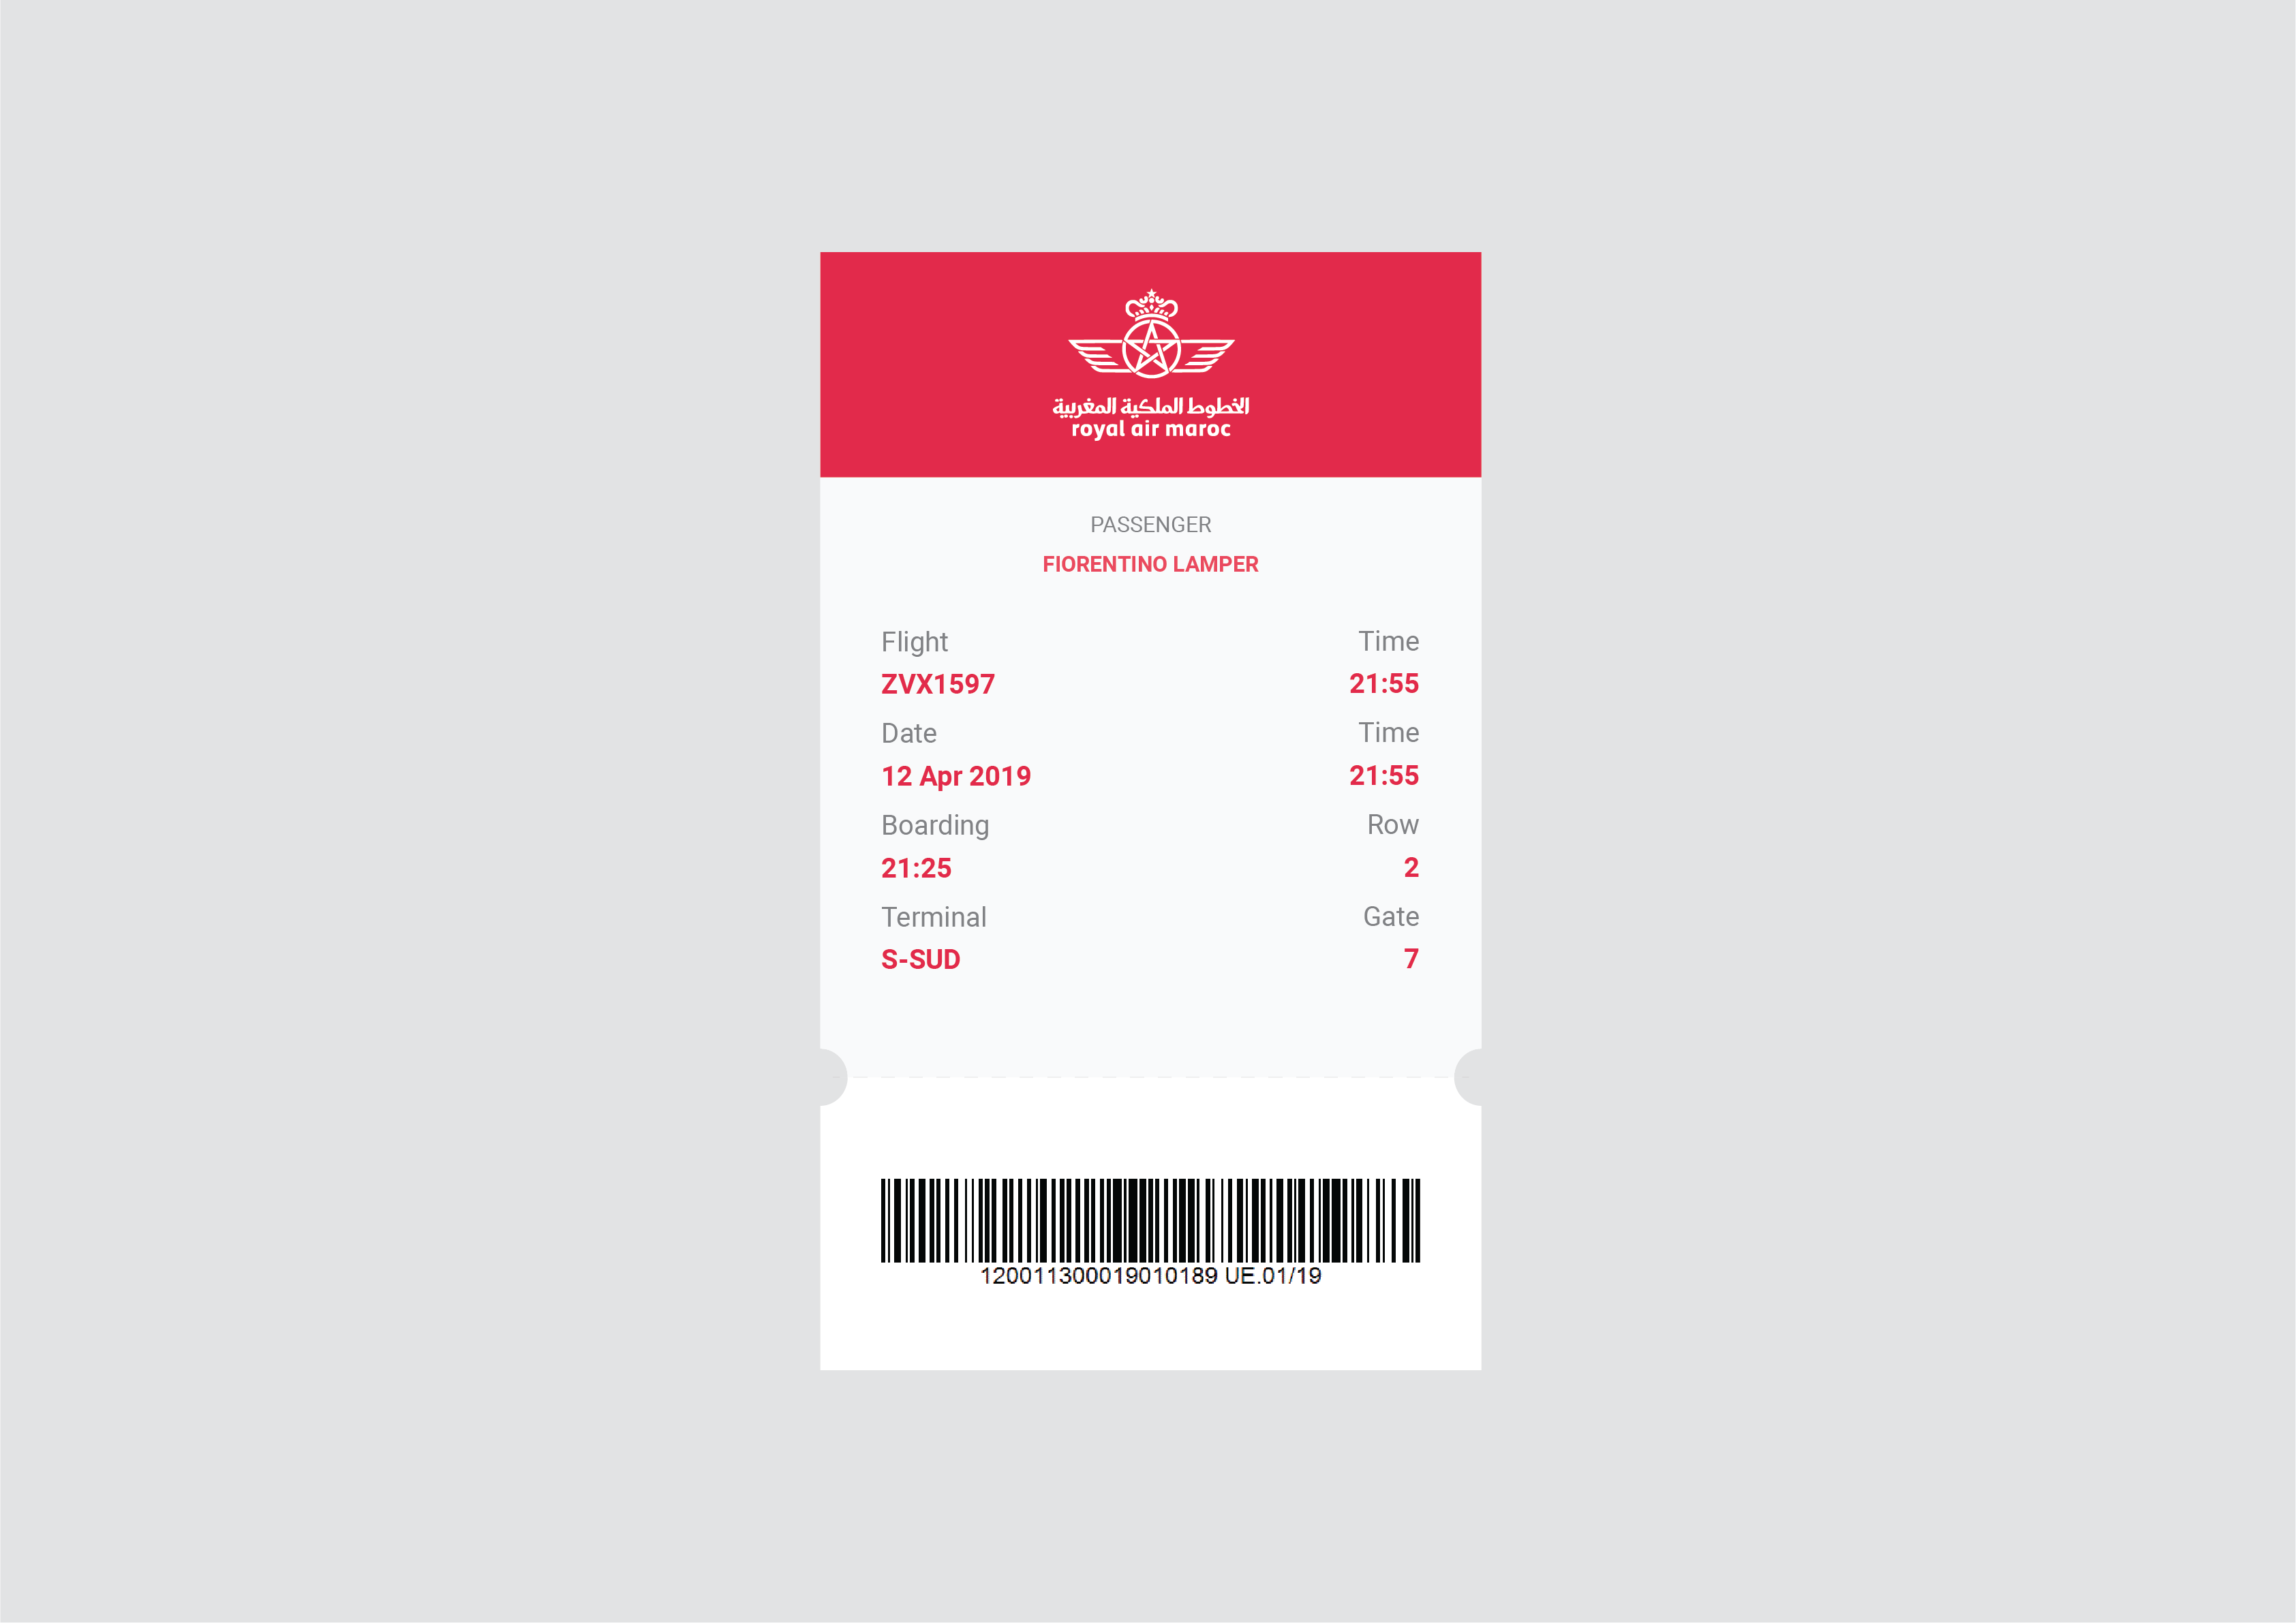 Royal Air Maroc Ticket by Himbra on Dribbble